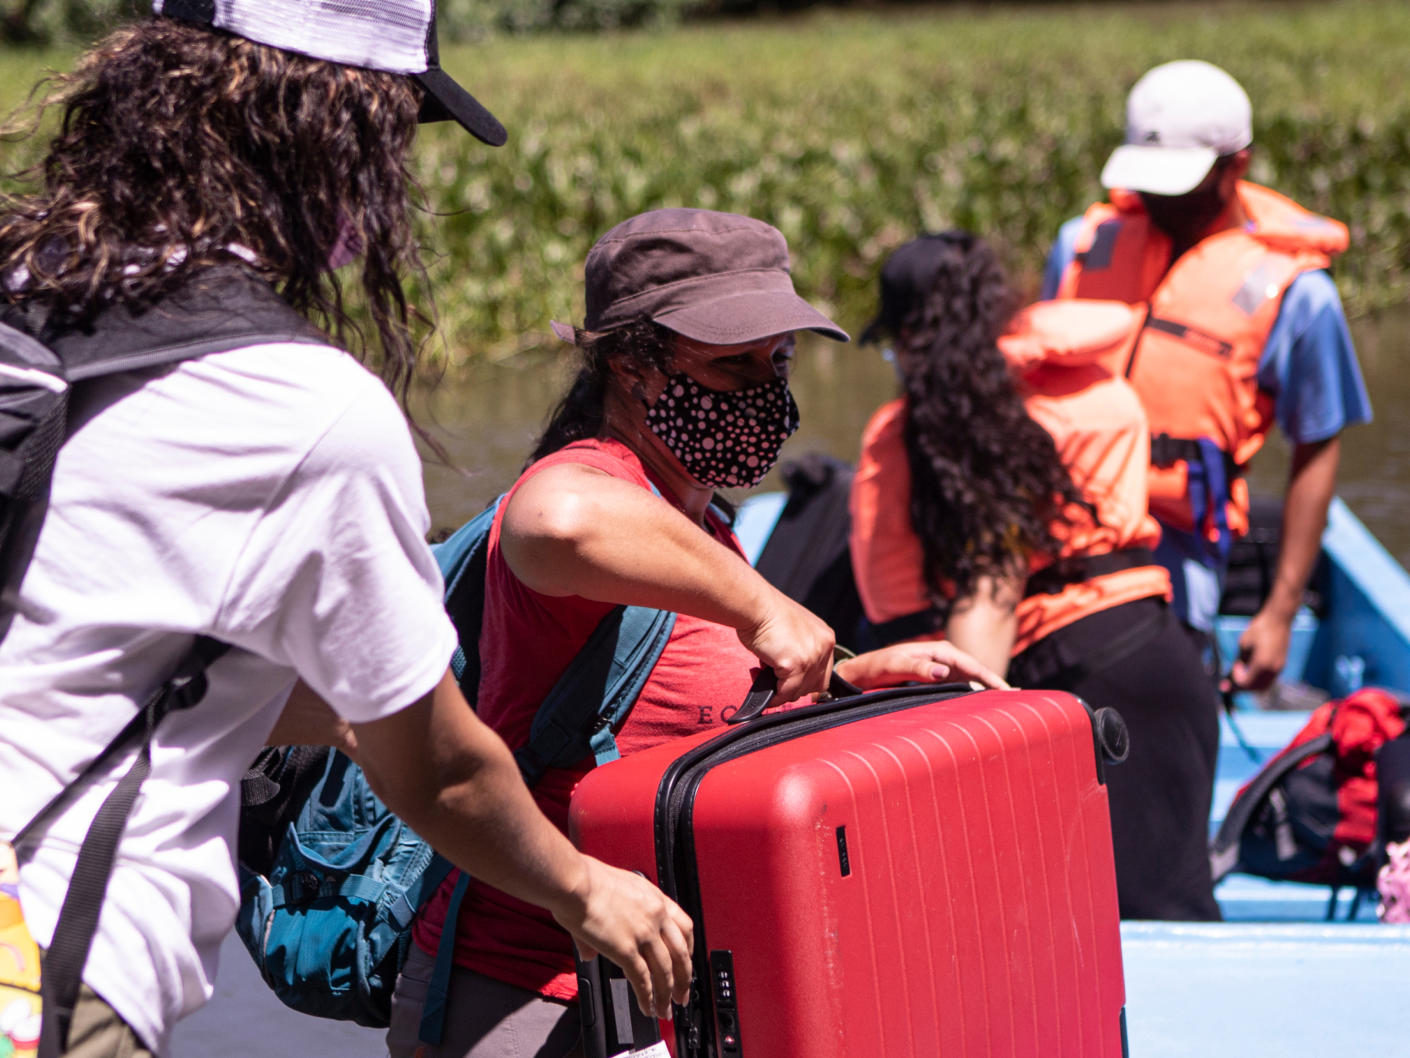 Away volunteers carrying the Away suitcase onto a boat